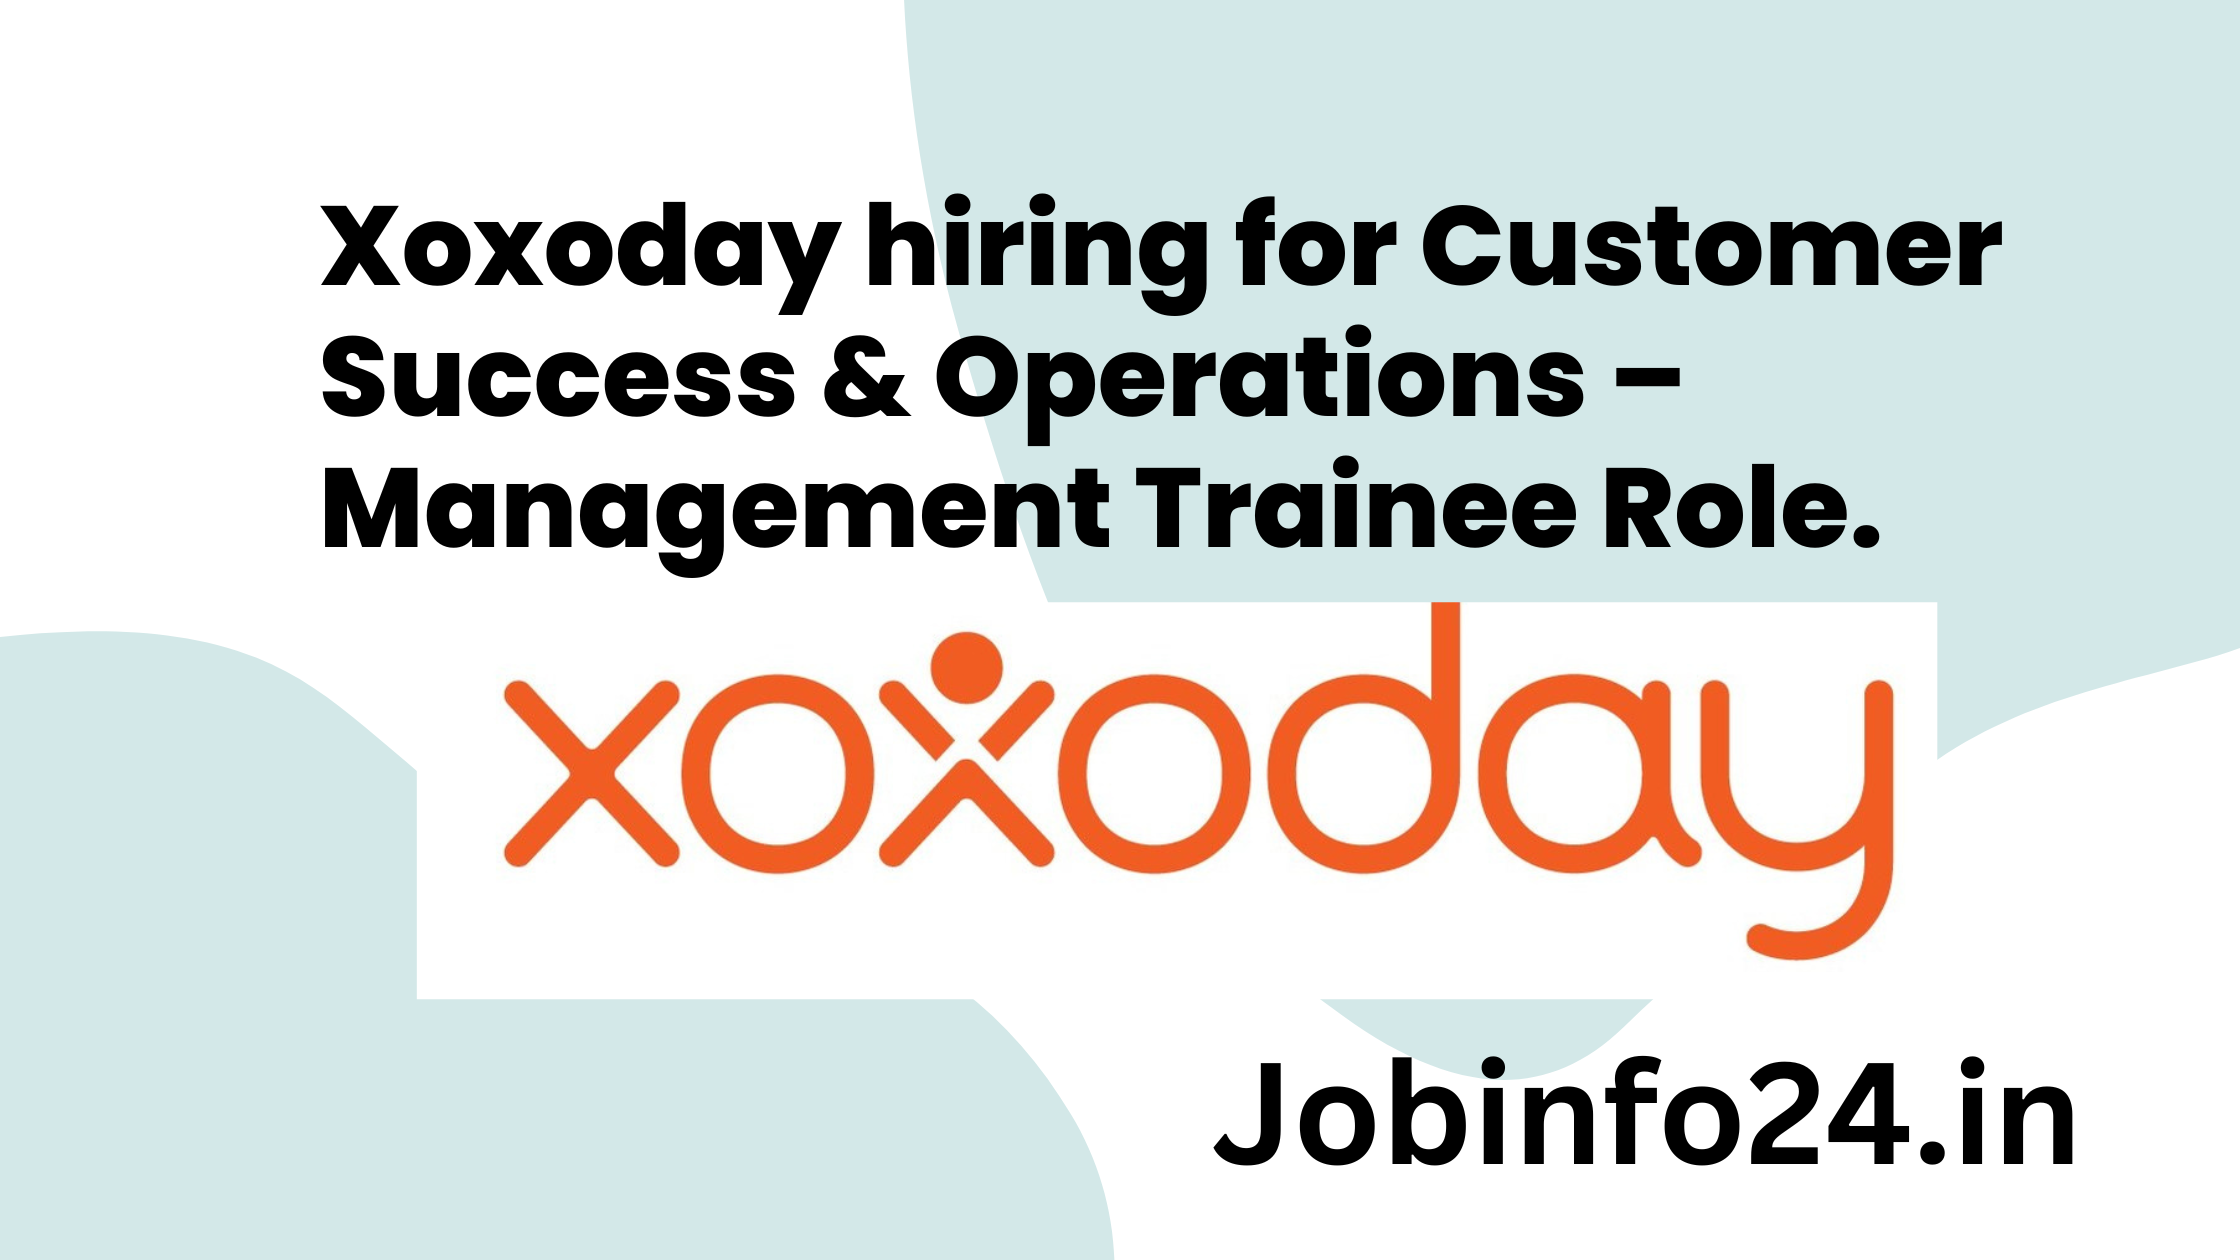 Xoxoday hiring for Customer Success & Operations – Management Trainee Role.